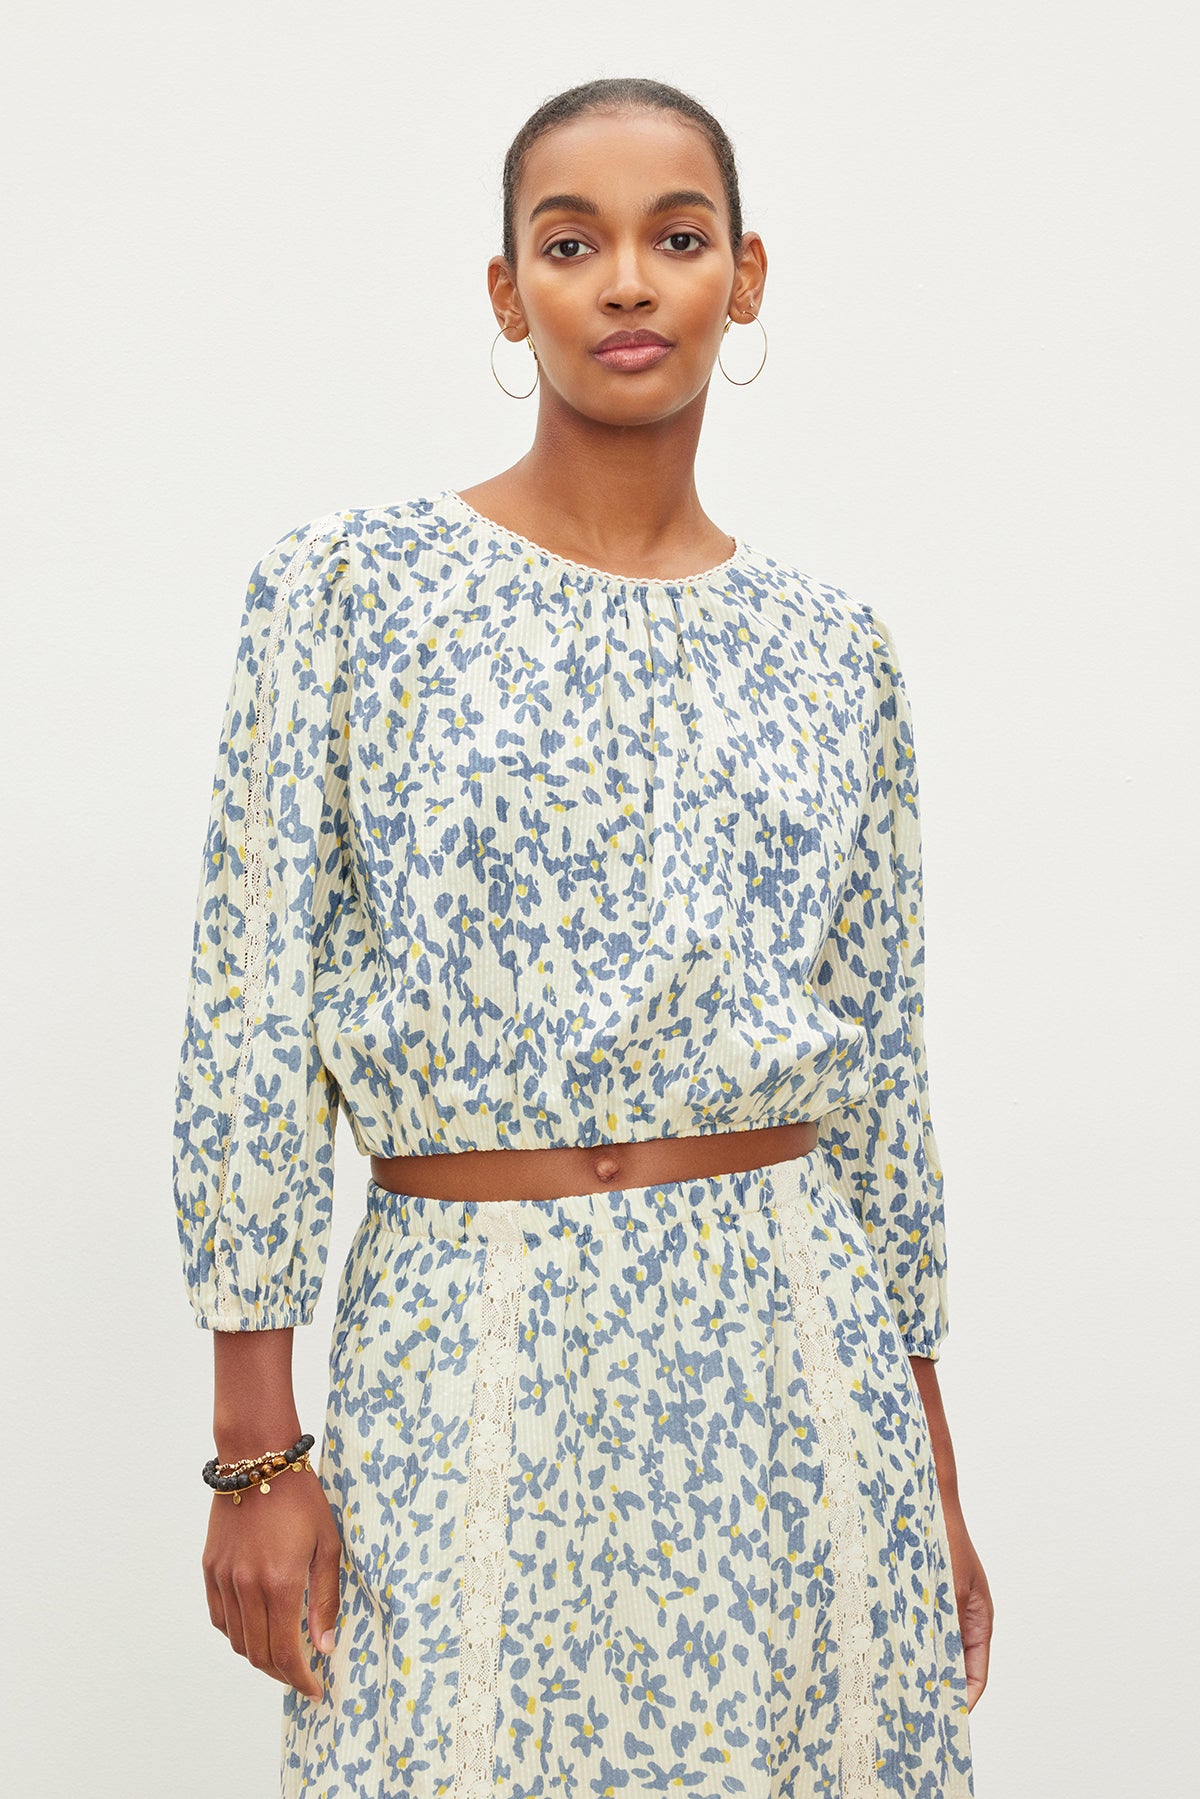 A woman stands against a plain background wearing a light-colored, floral-patterned CAMERON TOP by Velvet by Graham & Spencer with three-quarter sleeves and a matching skirt. She has short hair and is wearing hoop earrings and a bracelet.-37073697734849